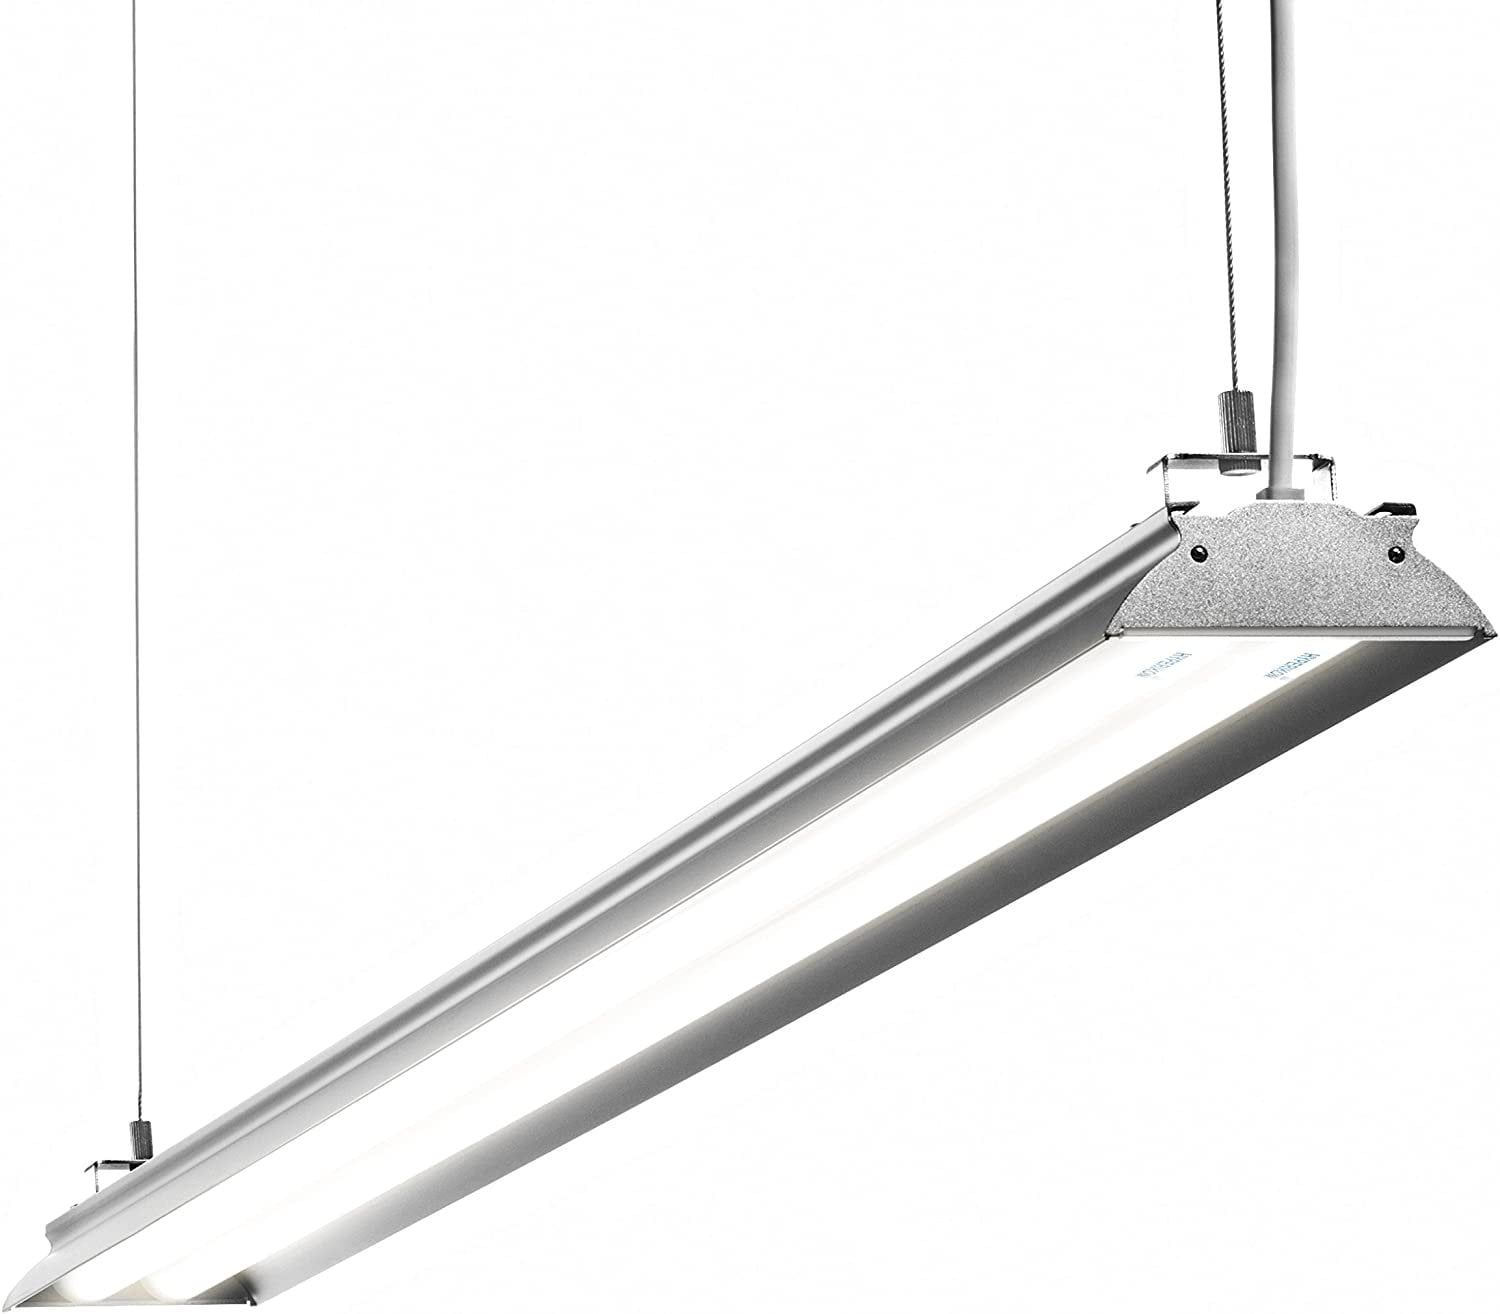 HyperSelect Utility LED Shop Light 100W Eq. Crystal White Glow 4FT Integrated LED Fixture Garage Light 3800 Lumens 35W 5000K Corded-electric Hyperikon VC0S2_922141051 Frosted Cover DLC 4.2 Premium Qualified